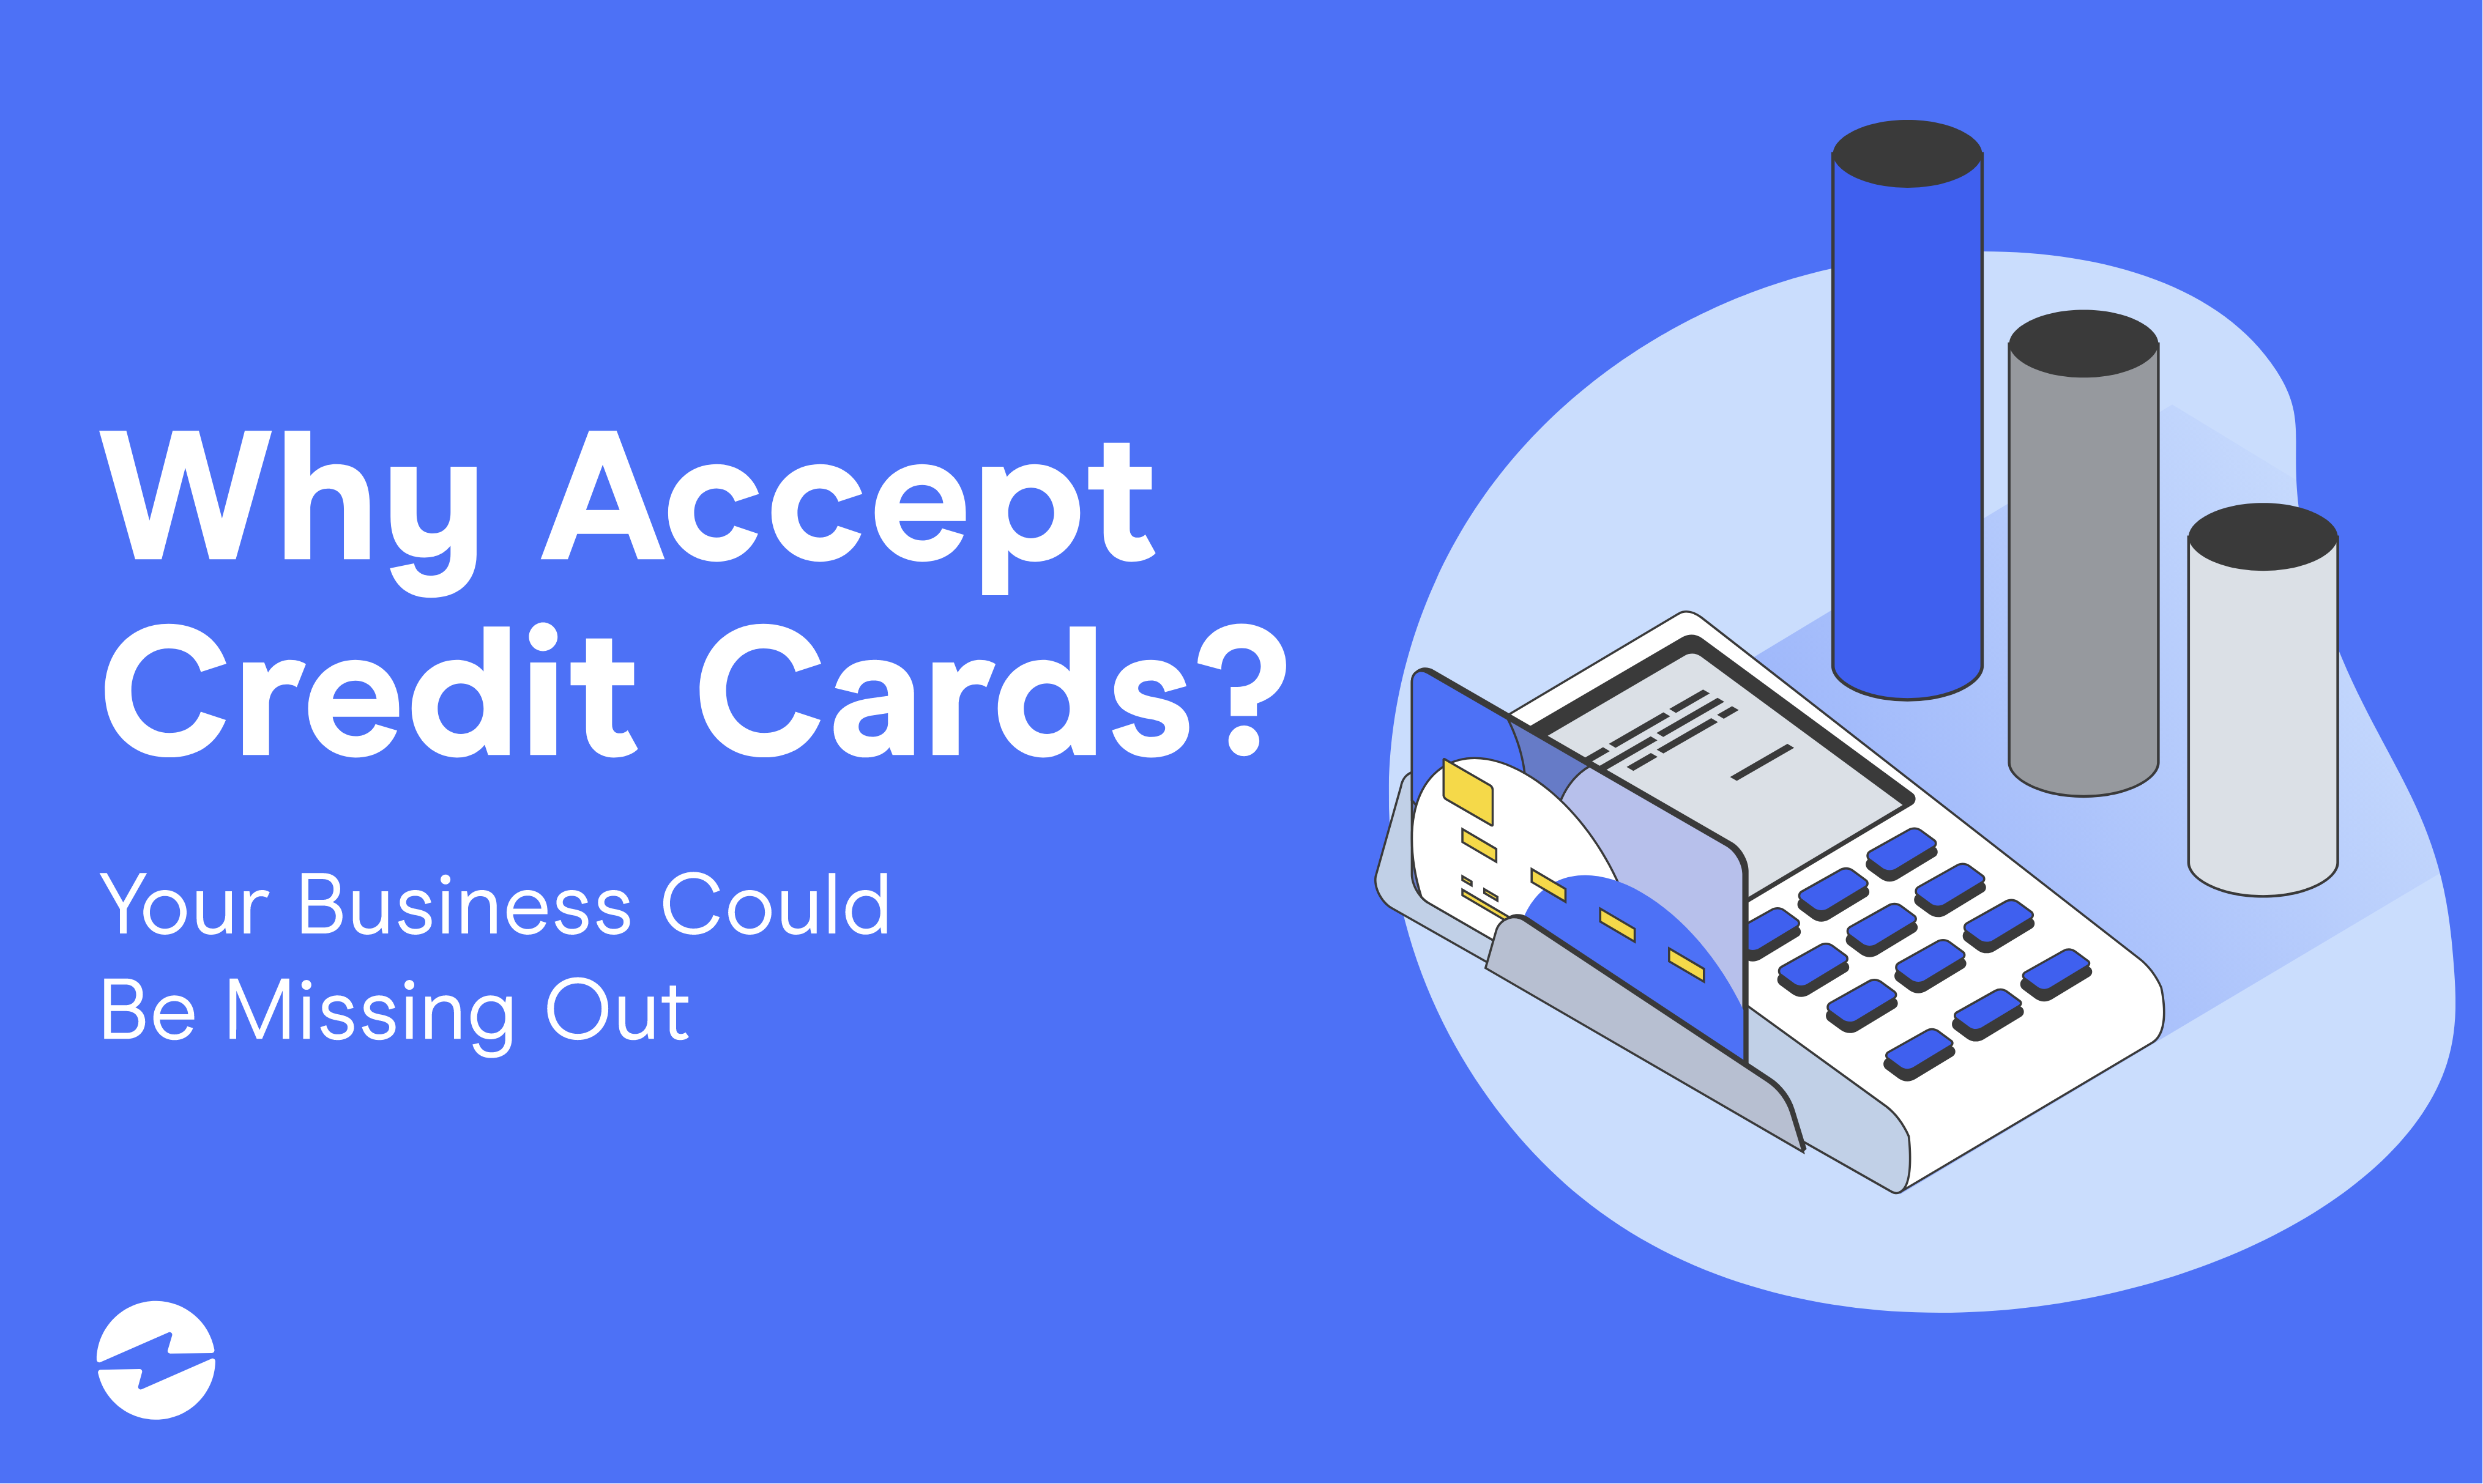 Why Should you accept credit cards